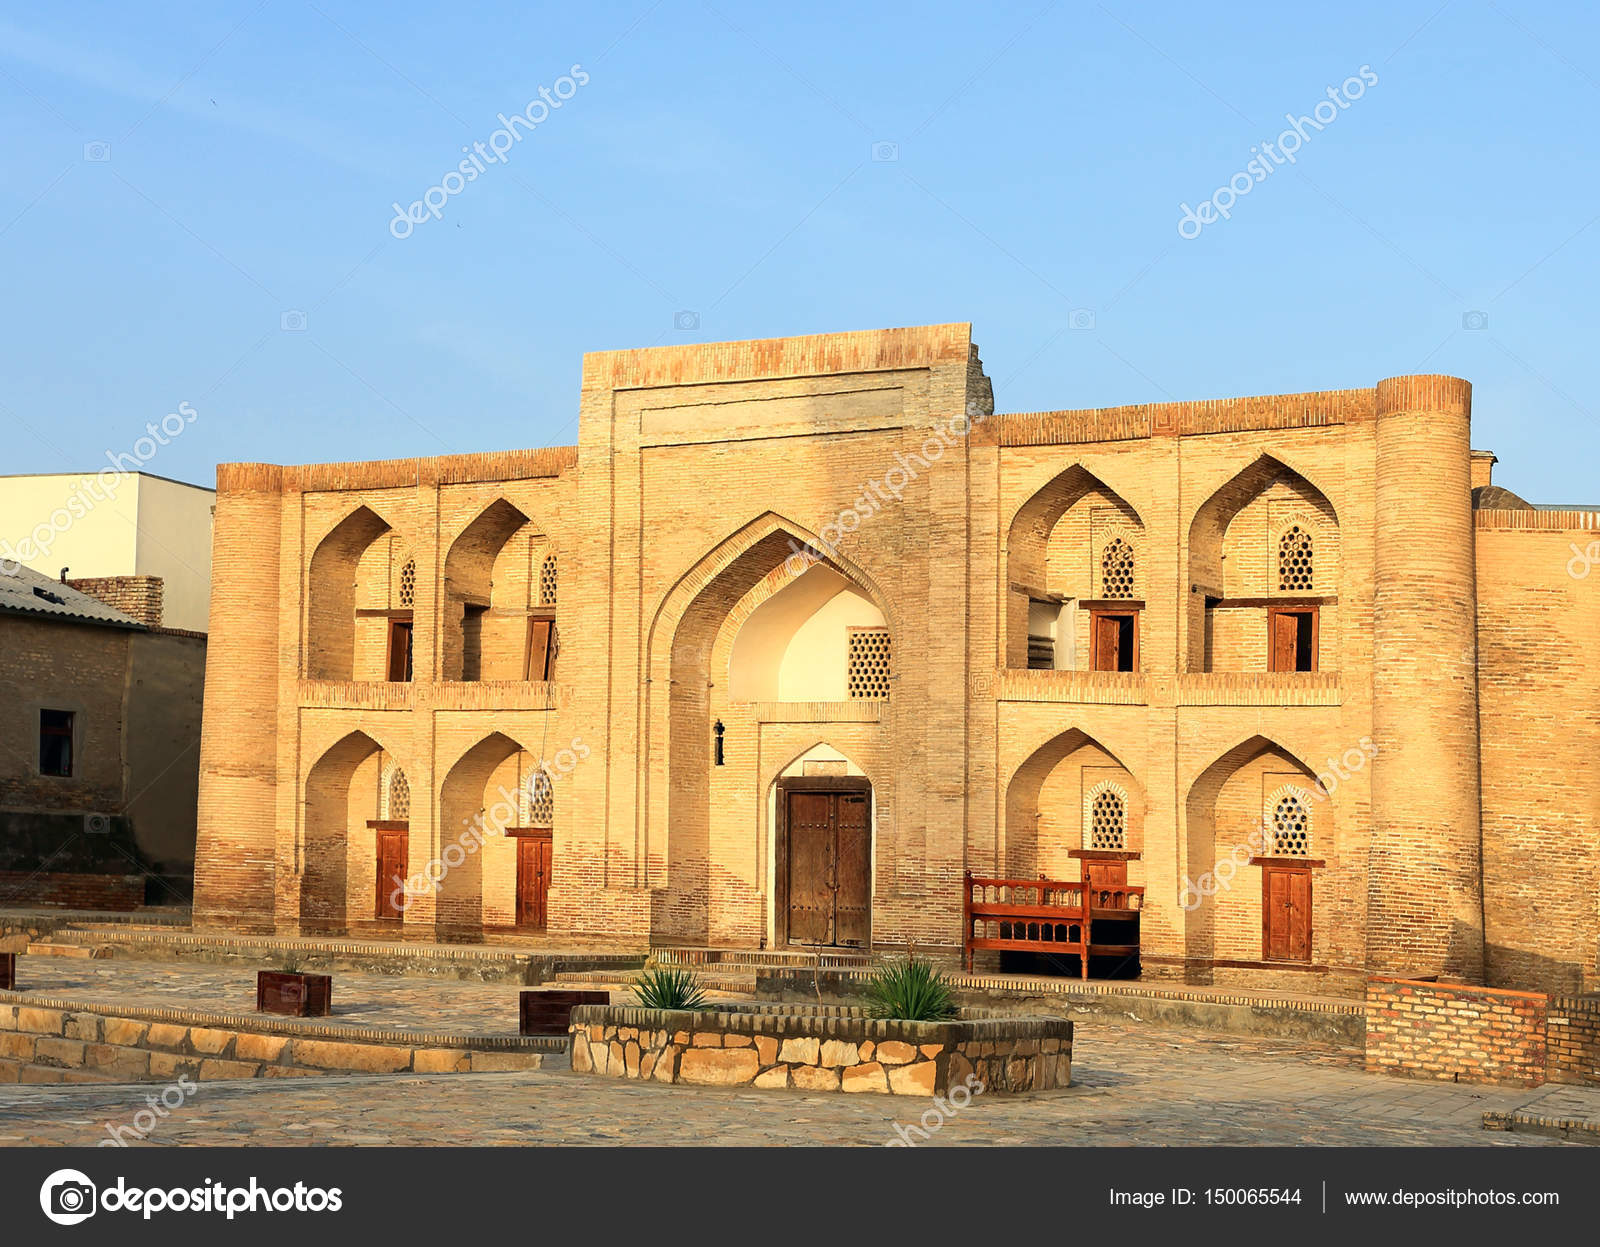 Medieval oriental structure — Stock Photo © pingvin121674 #150065544